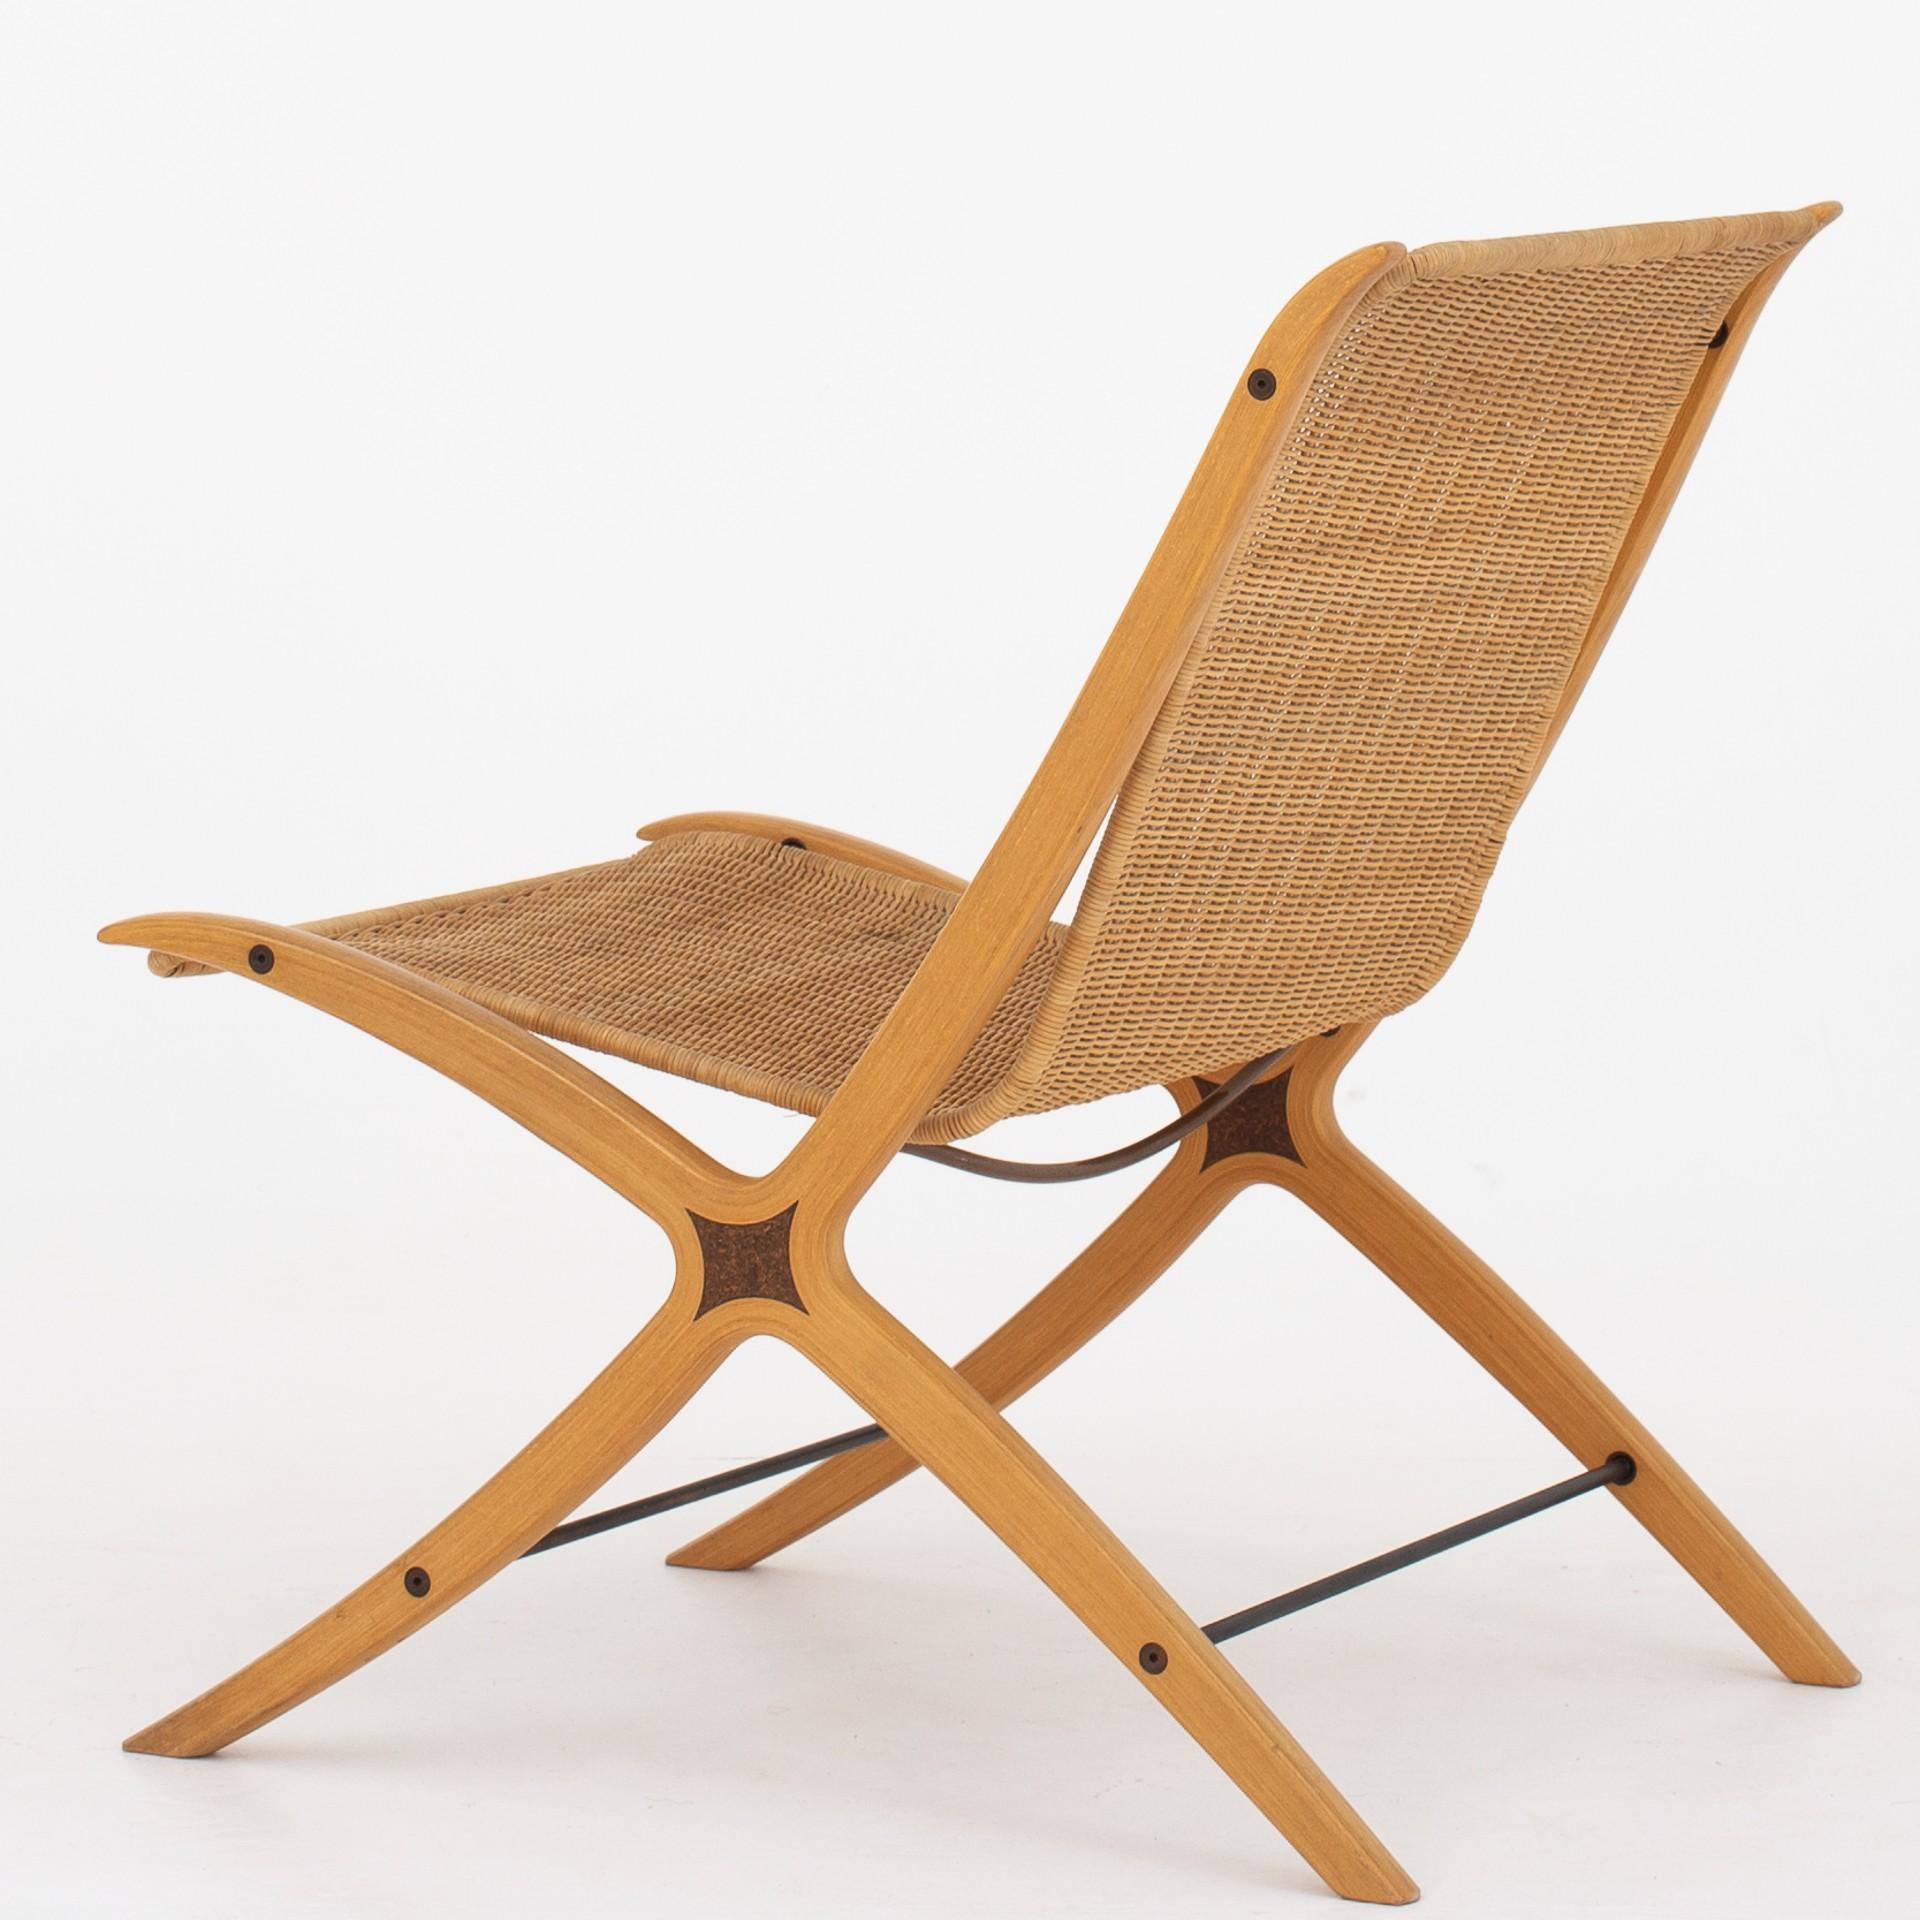 The 'X-chair' in form-bent, laminated beech wood with inlays and original cane. Brass cross bars. Model 6103. Maker Fritz Hansen.